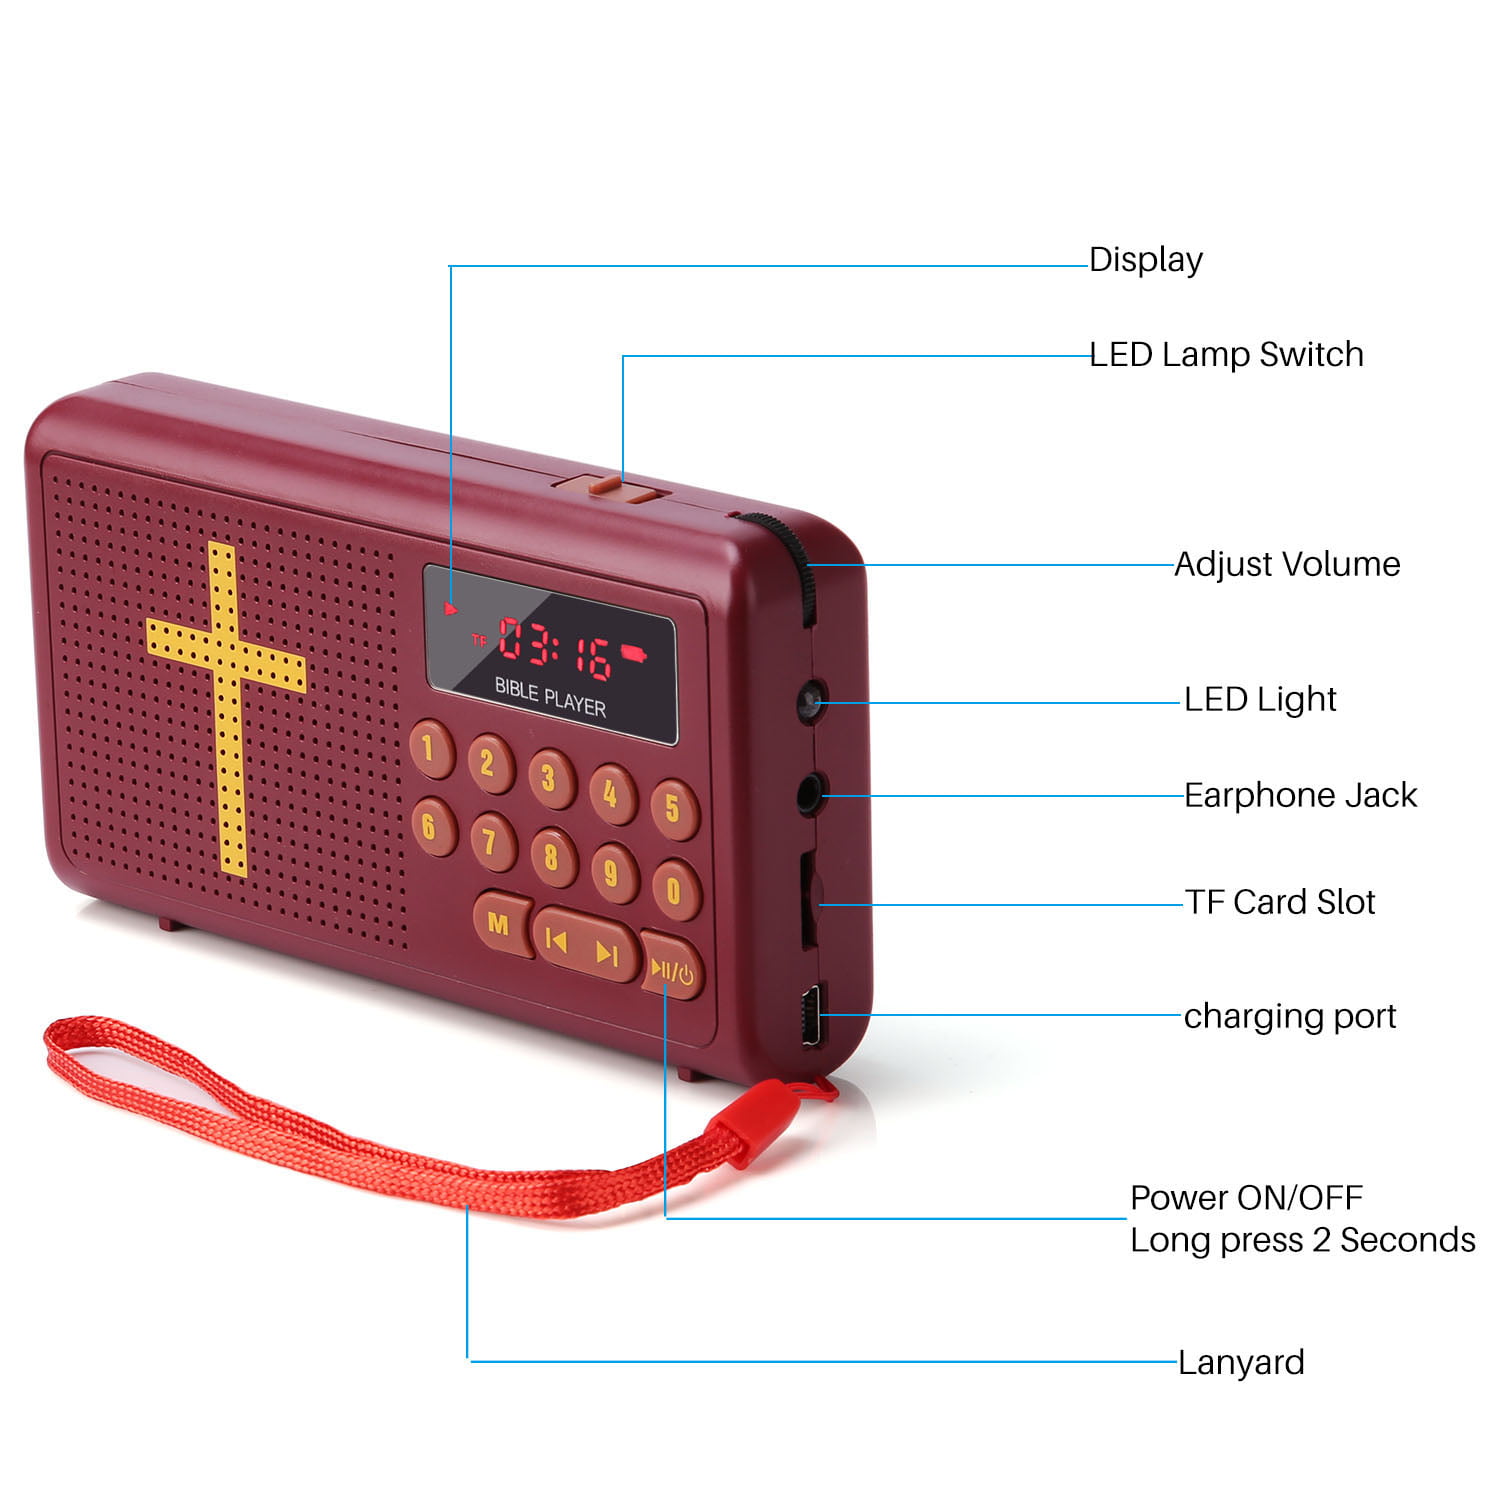 with 350mah Rechargeable Battery,Ear Buds and Built-in Speaker English Black Yoidesu Audio Bible Player,The Talking Audio Bible Player with Built-in 4G Capacity,Solar Charging Electronic Bible 